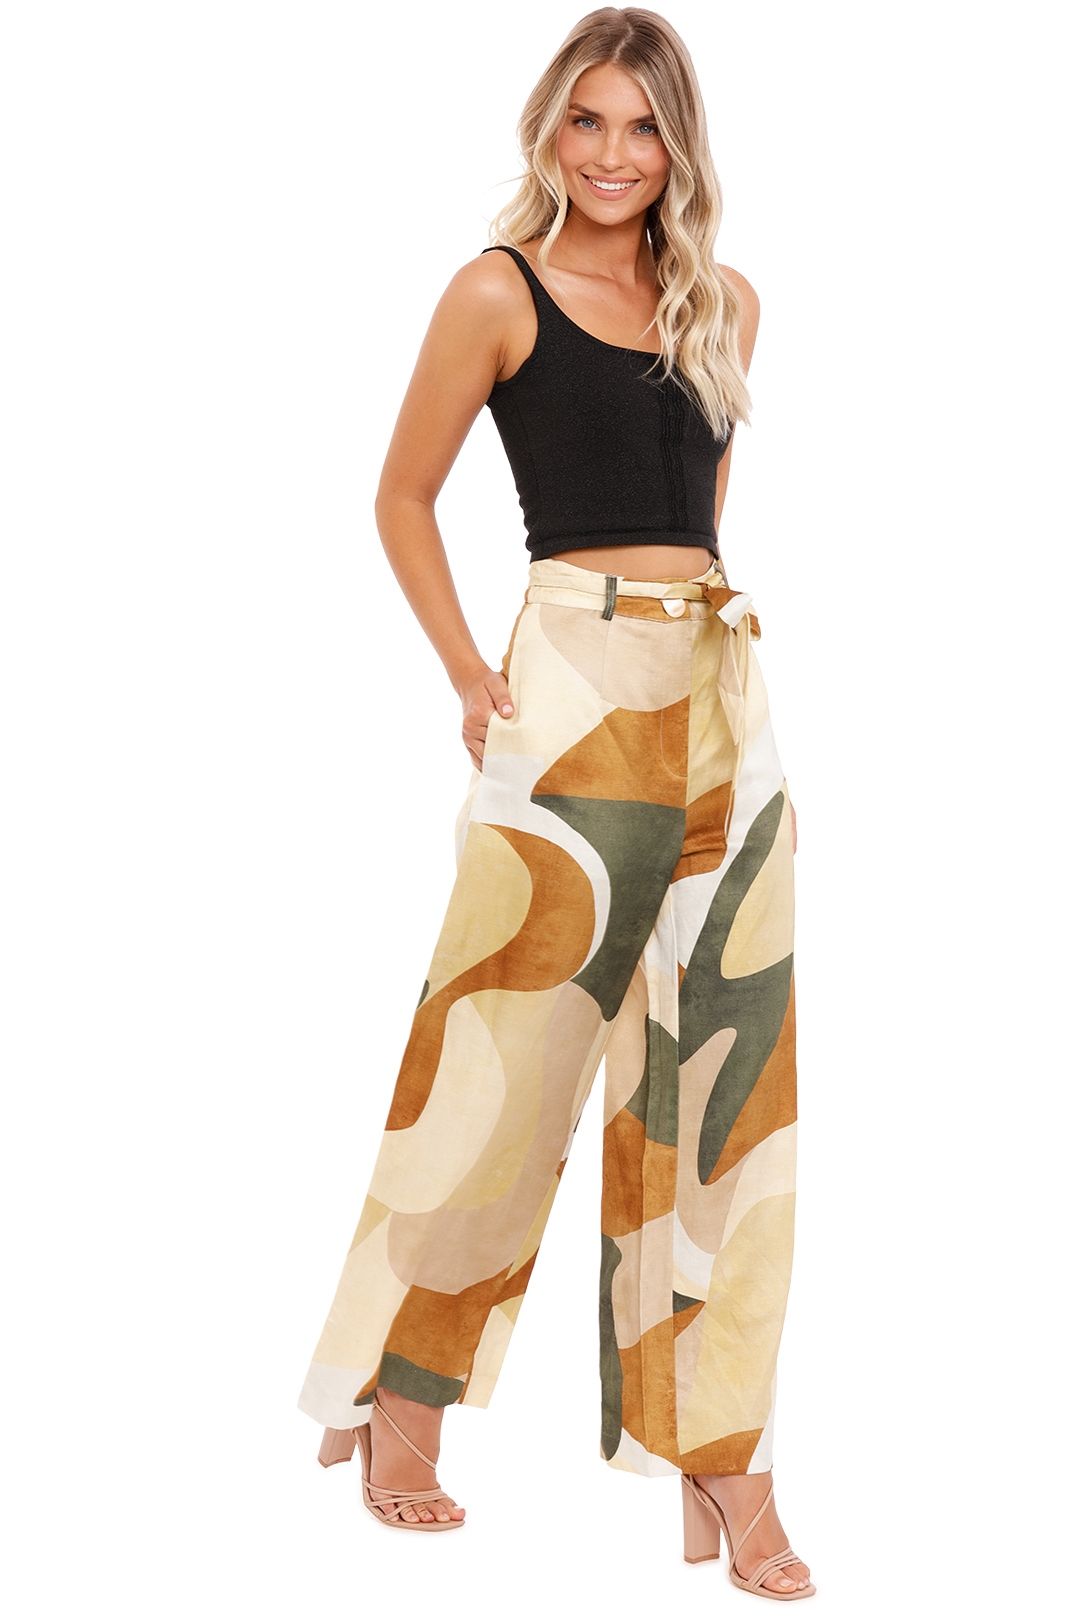 Ministry of Style Retro Resort Wide Leg Pants Abstract Print